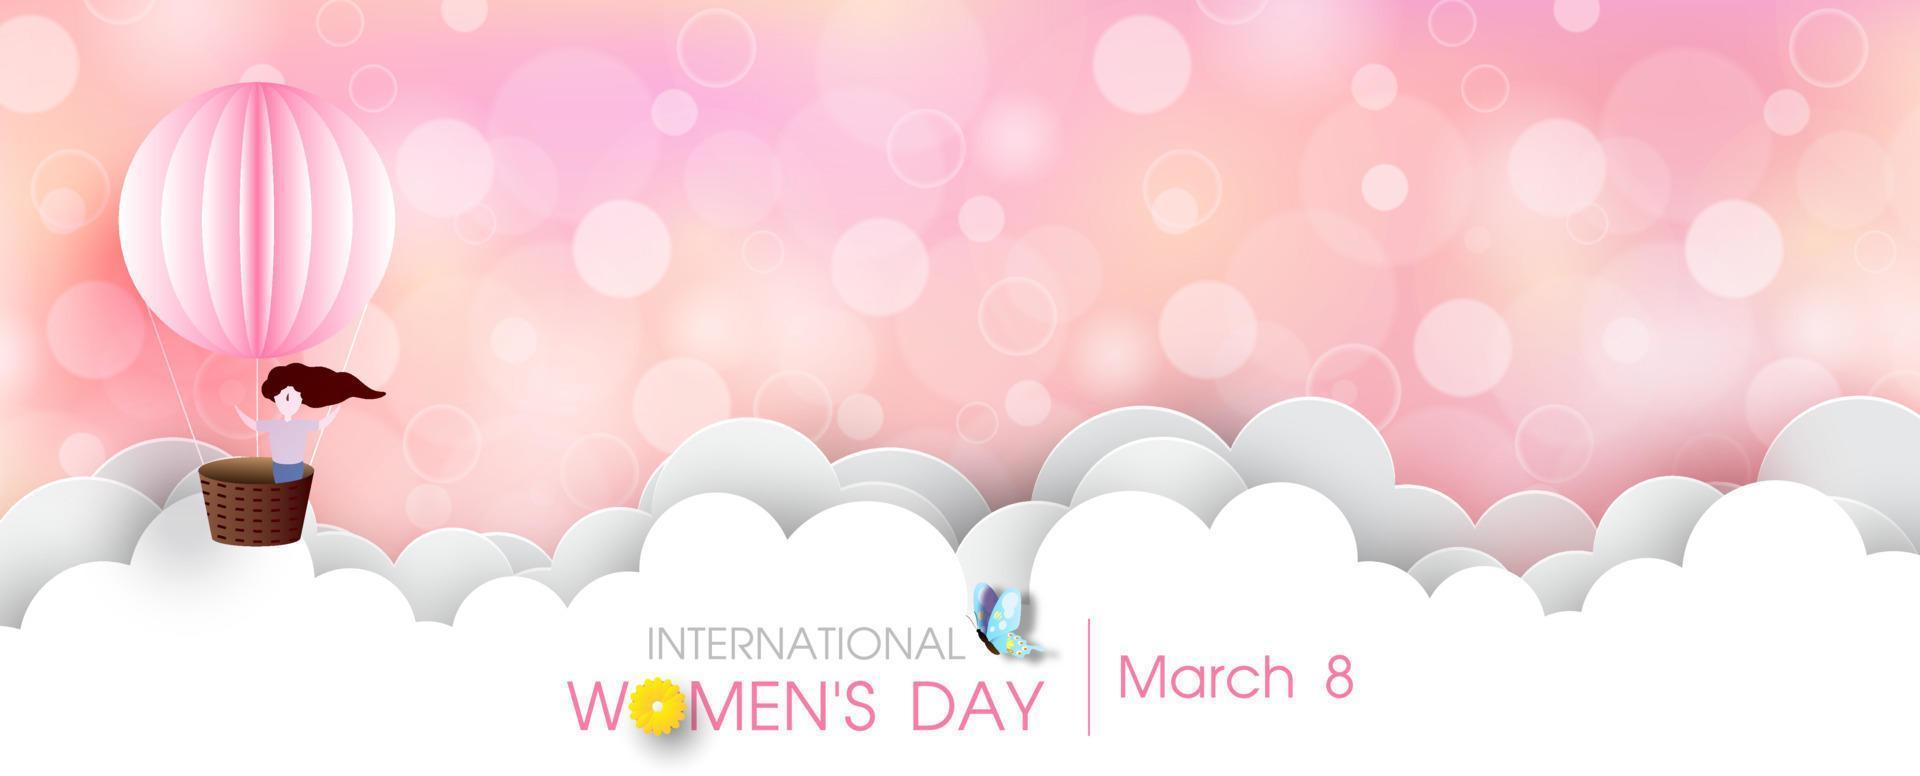 Happy girl in a pink balloon with big clouds and wording of Women's day event on blurred and bokeh pink background. International women's day greeting card in paper cut style and banner vector design.